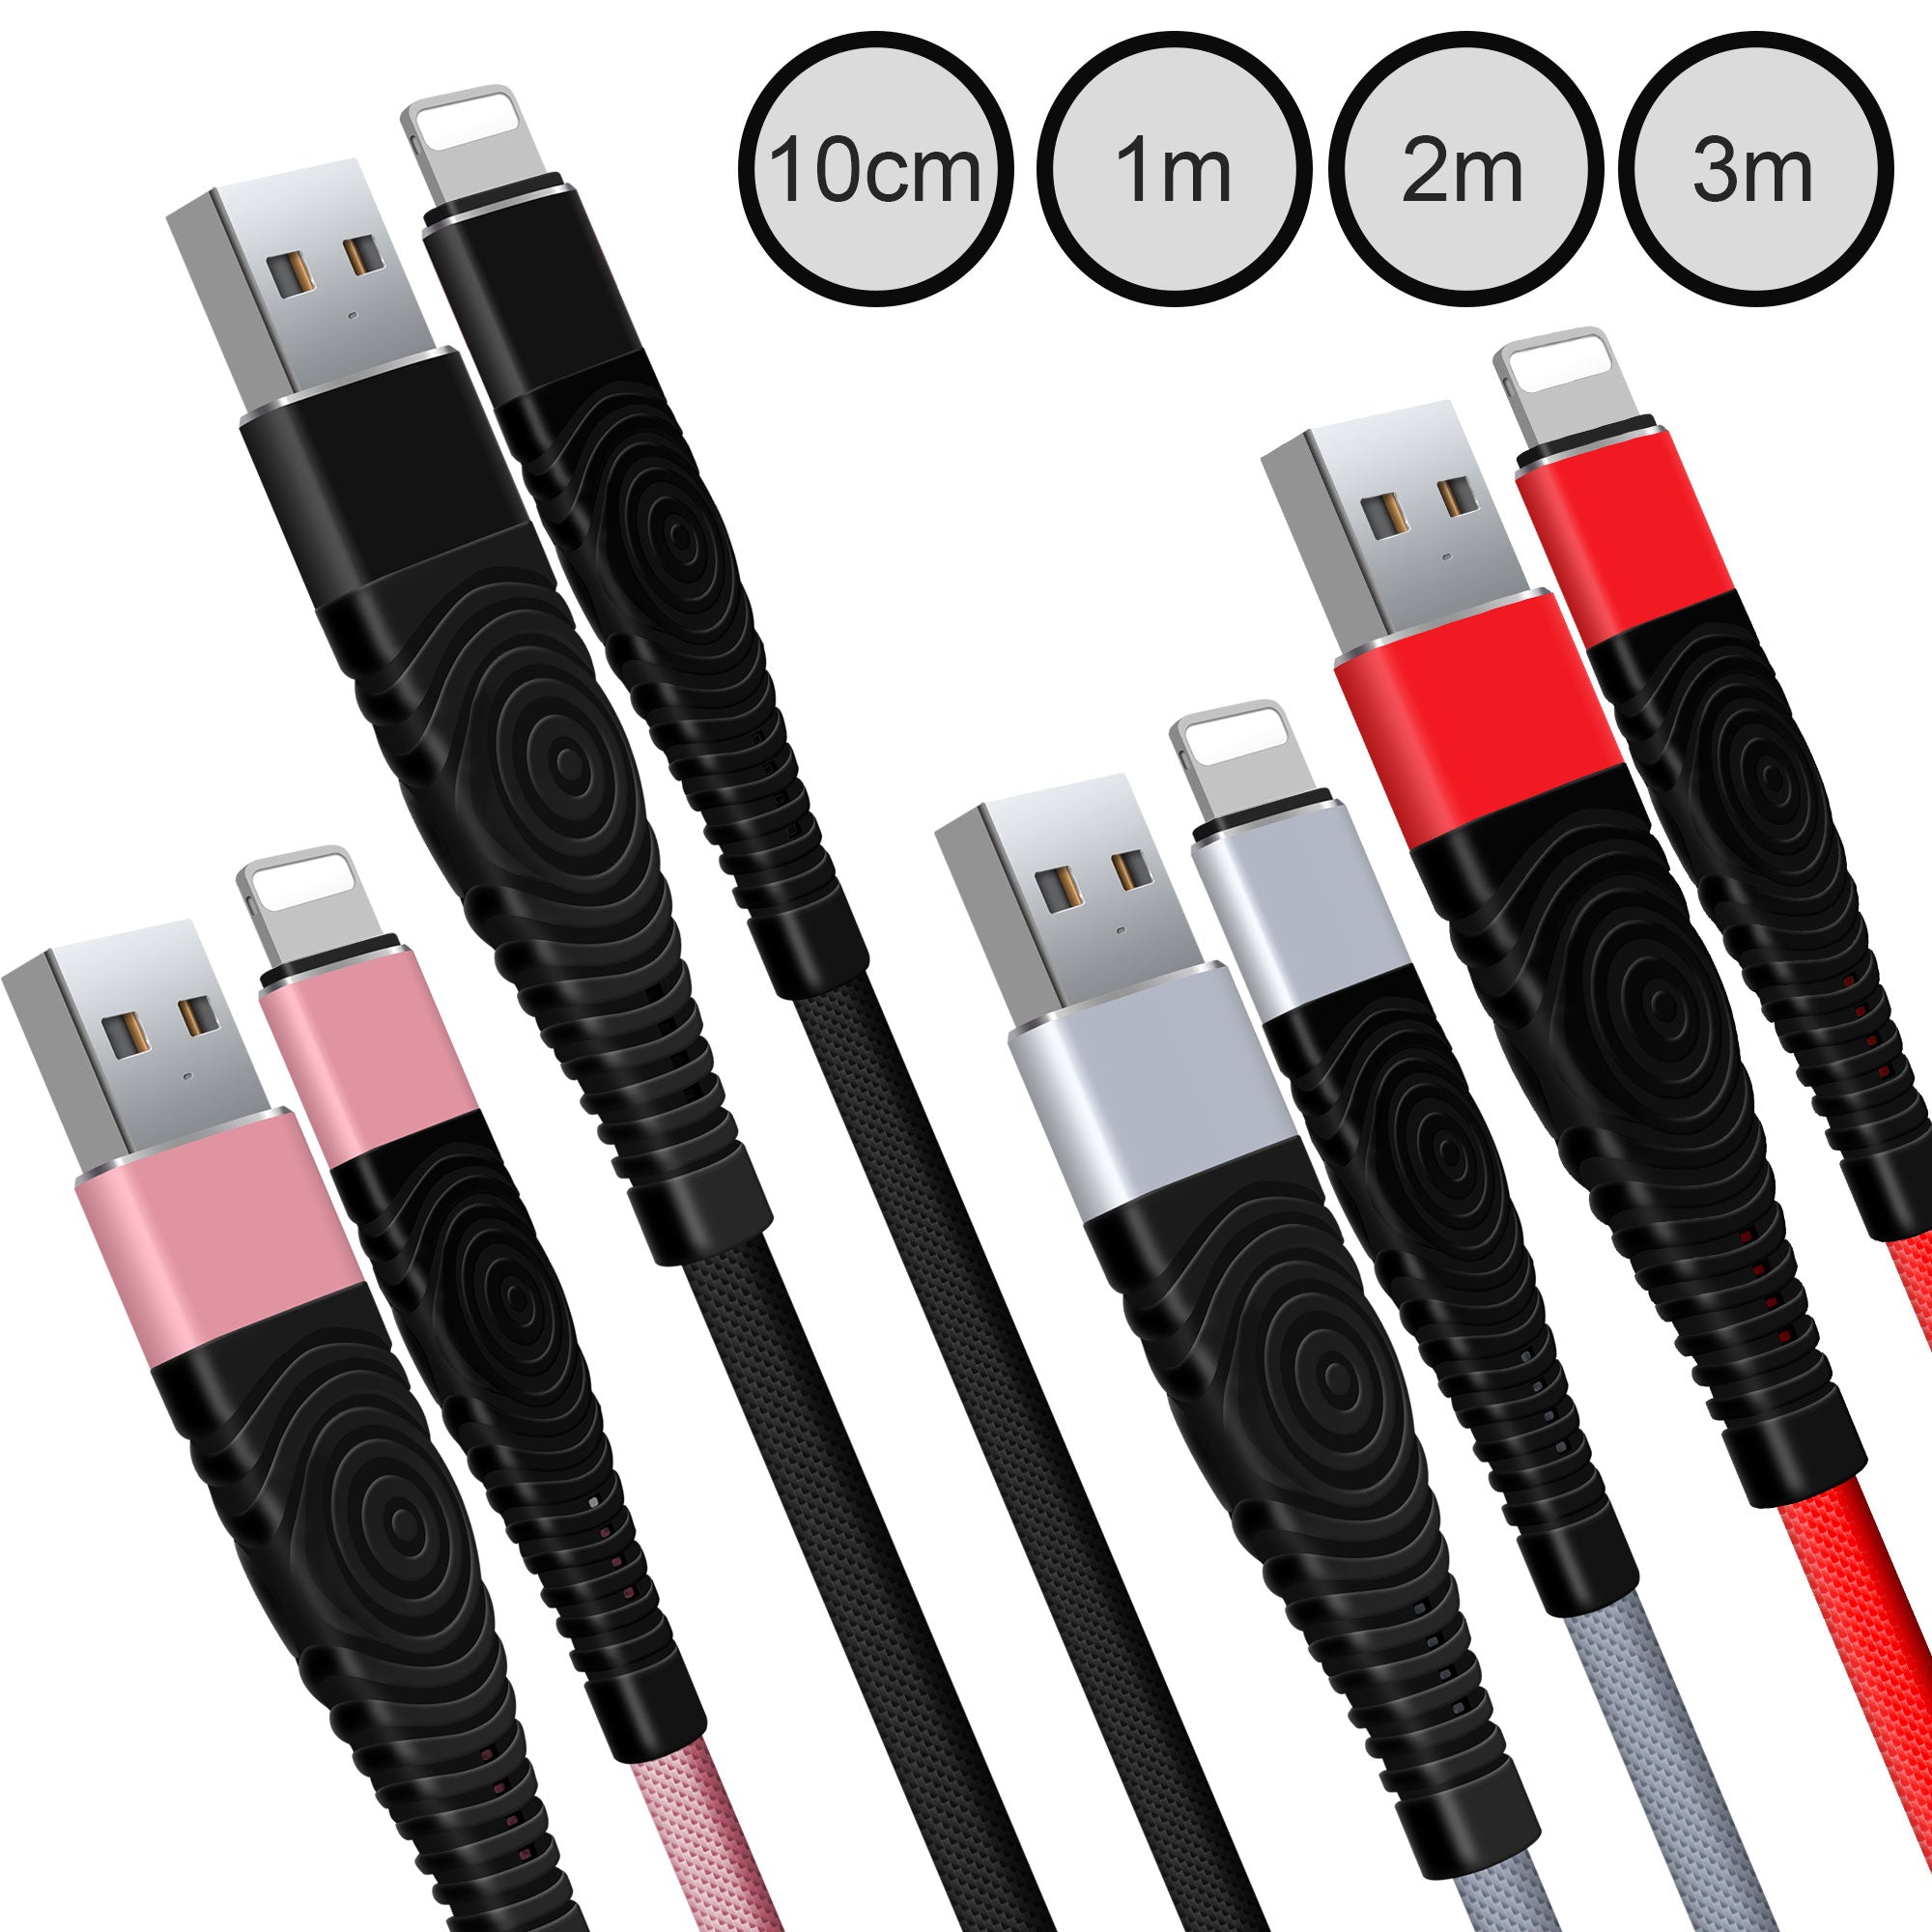 Lightning iPhone Charger Cable